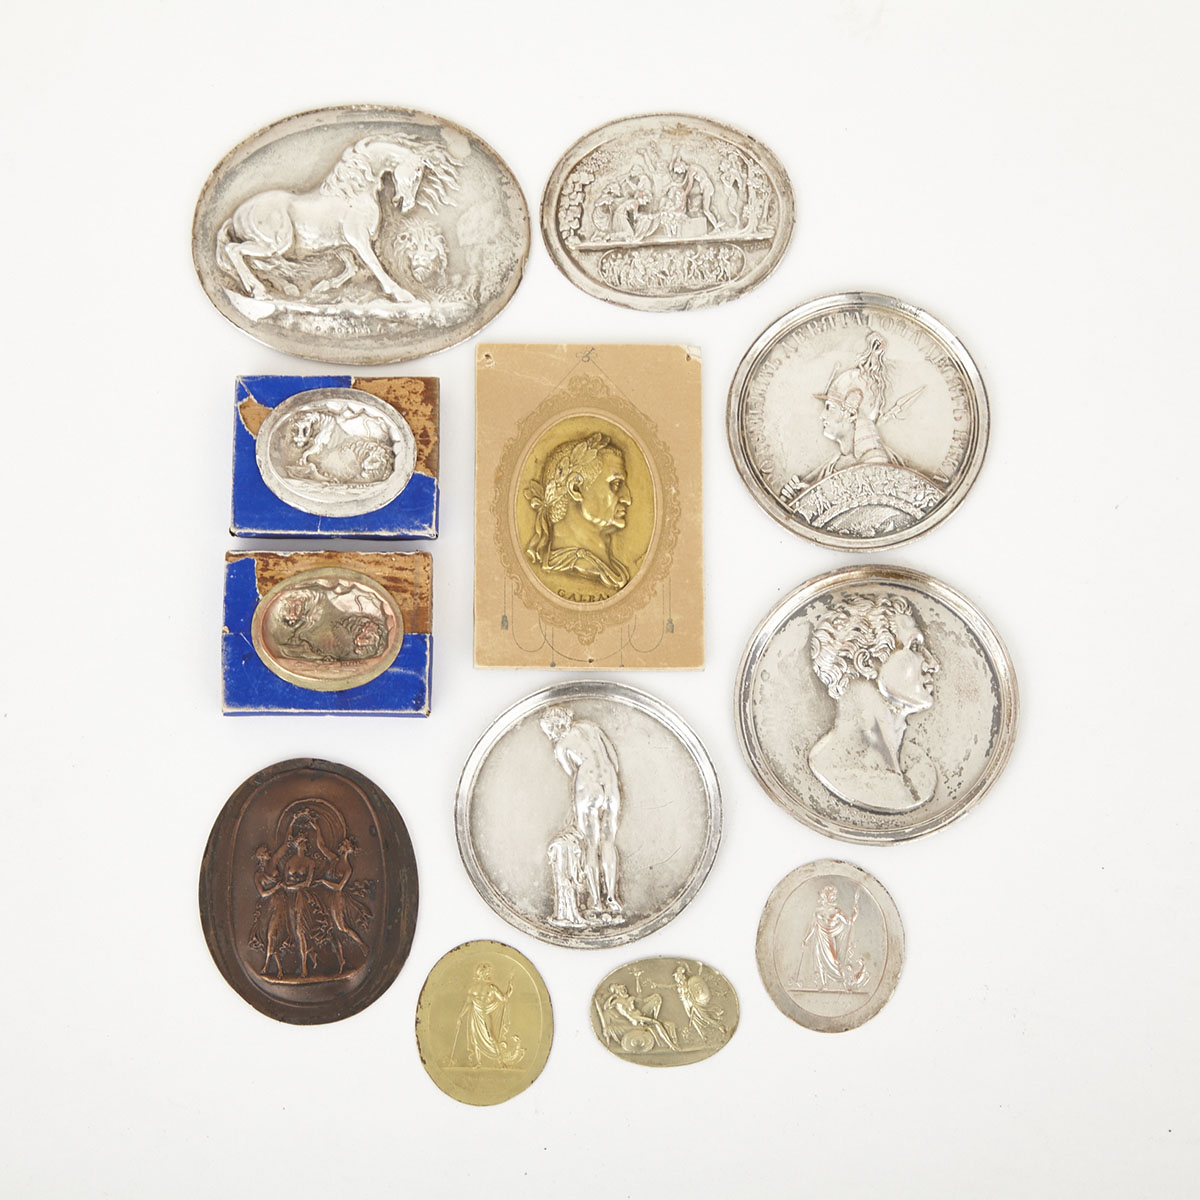 Collection of 12 Electrotype Silvered and Gilt Copper Relief Medallions, mid 19th century